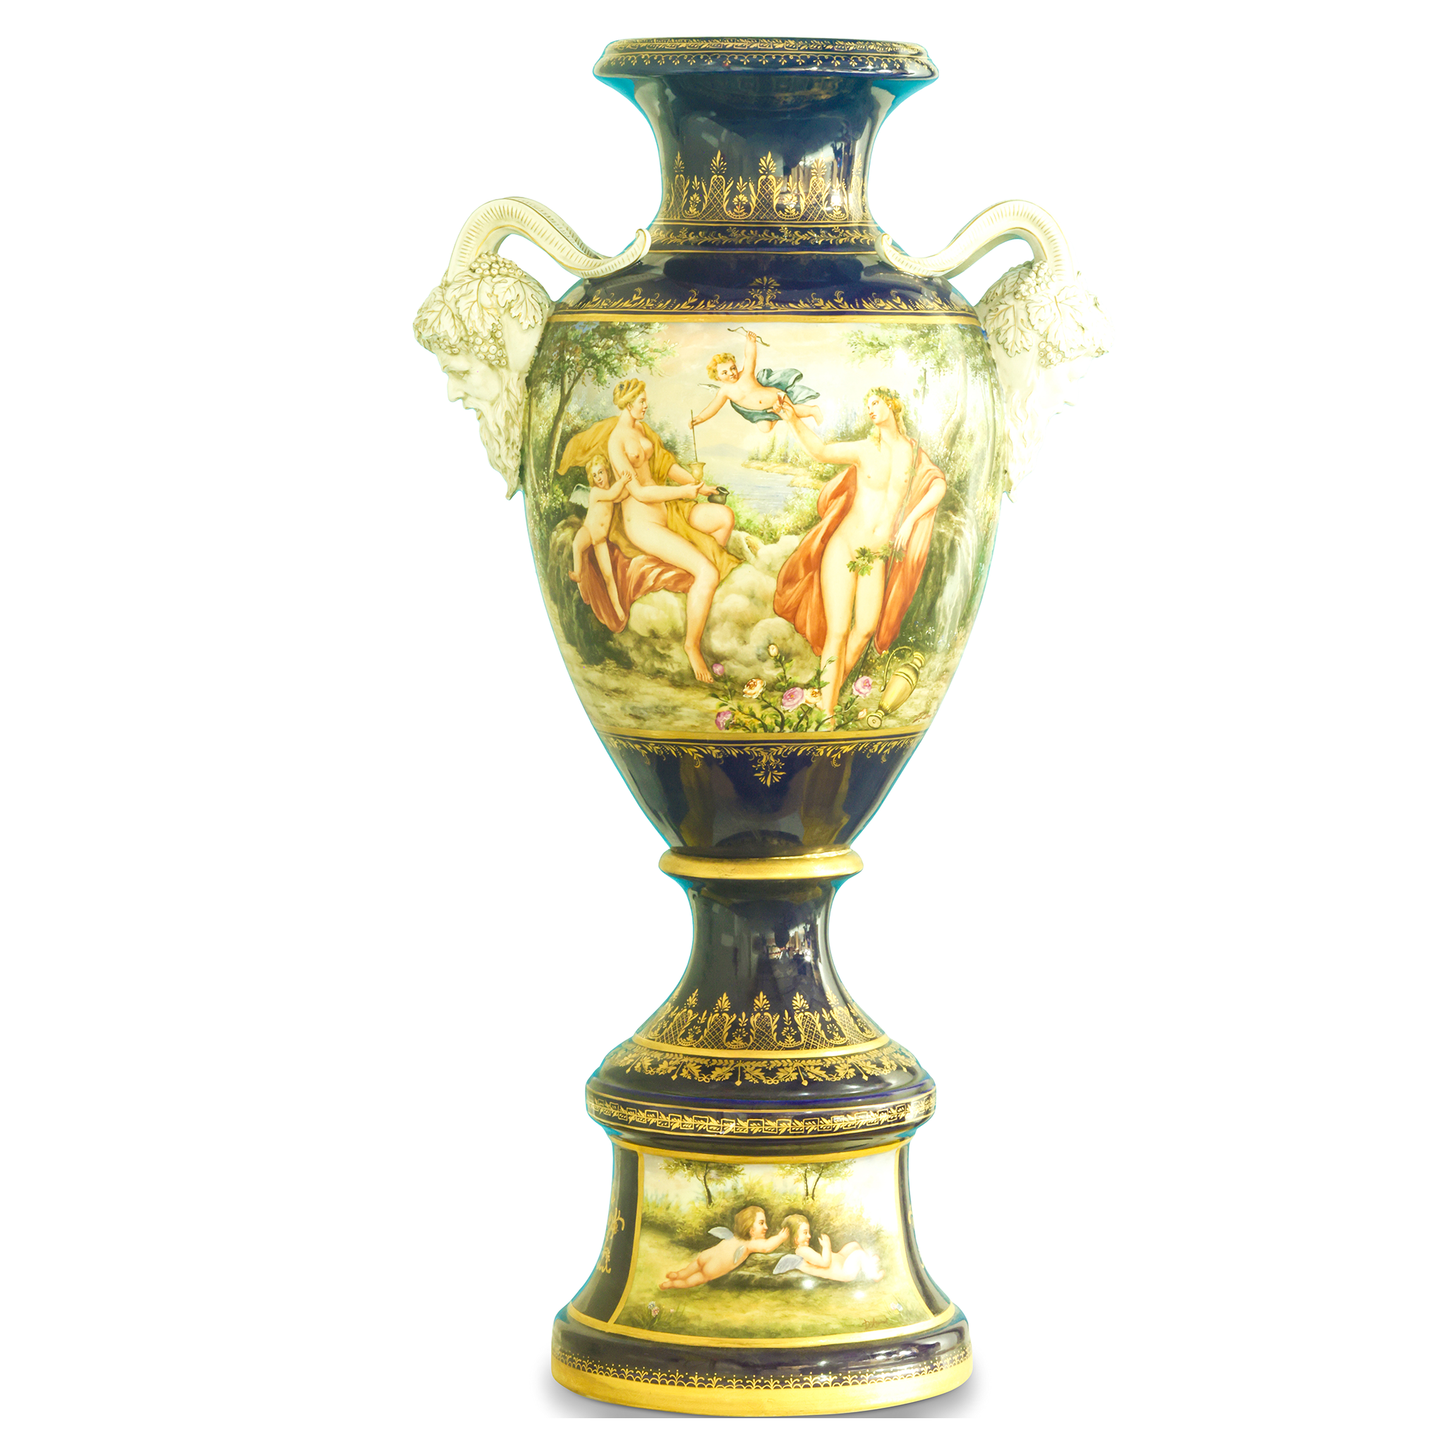 Rococo Style Hand-Painted Porcelain Urn